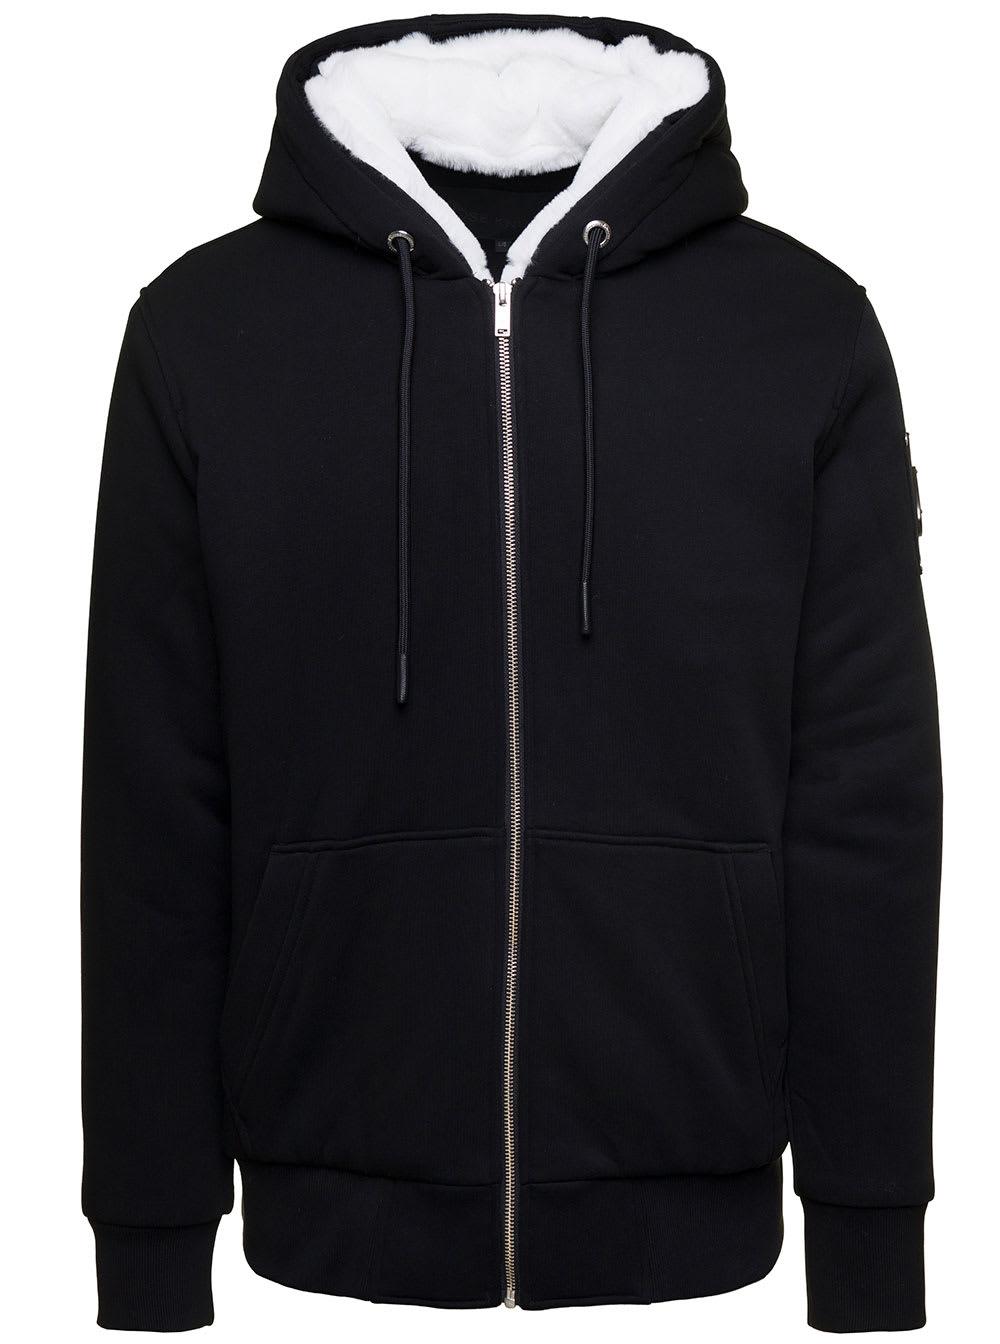 MOOSE KNUCKLES CLASSIC BUNNY BLACK ZIP-UP HOODED JACKET IN COTTON BLEND MAN